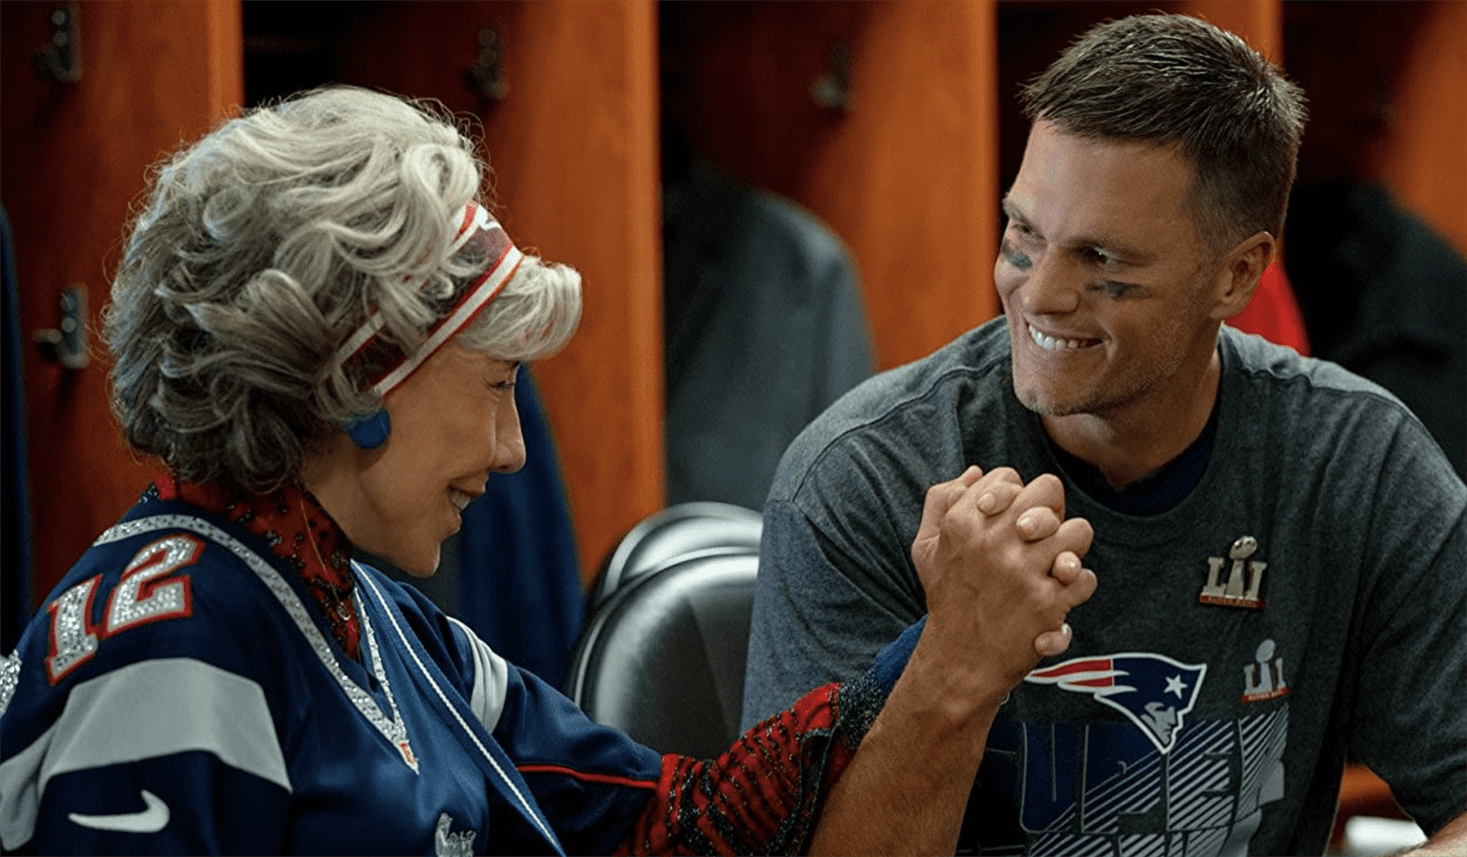 Tom Brady stars as himself in the film. Photo courtesy of Paramount Pictures